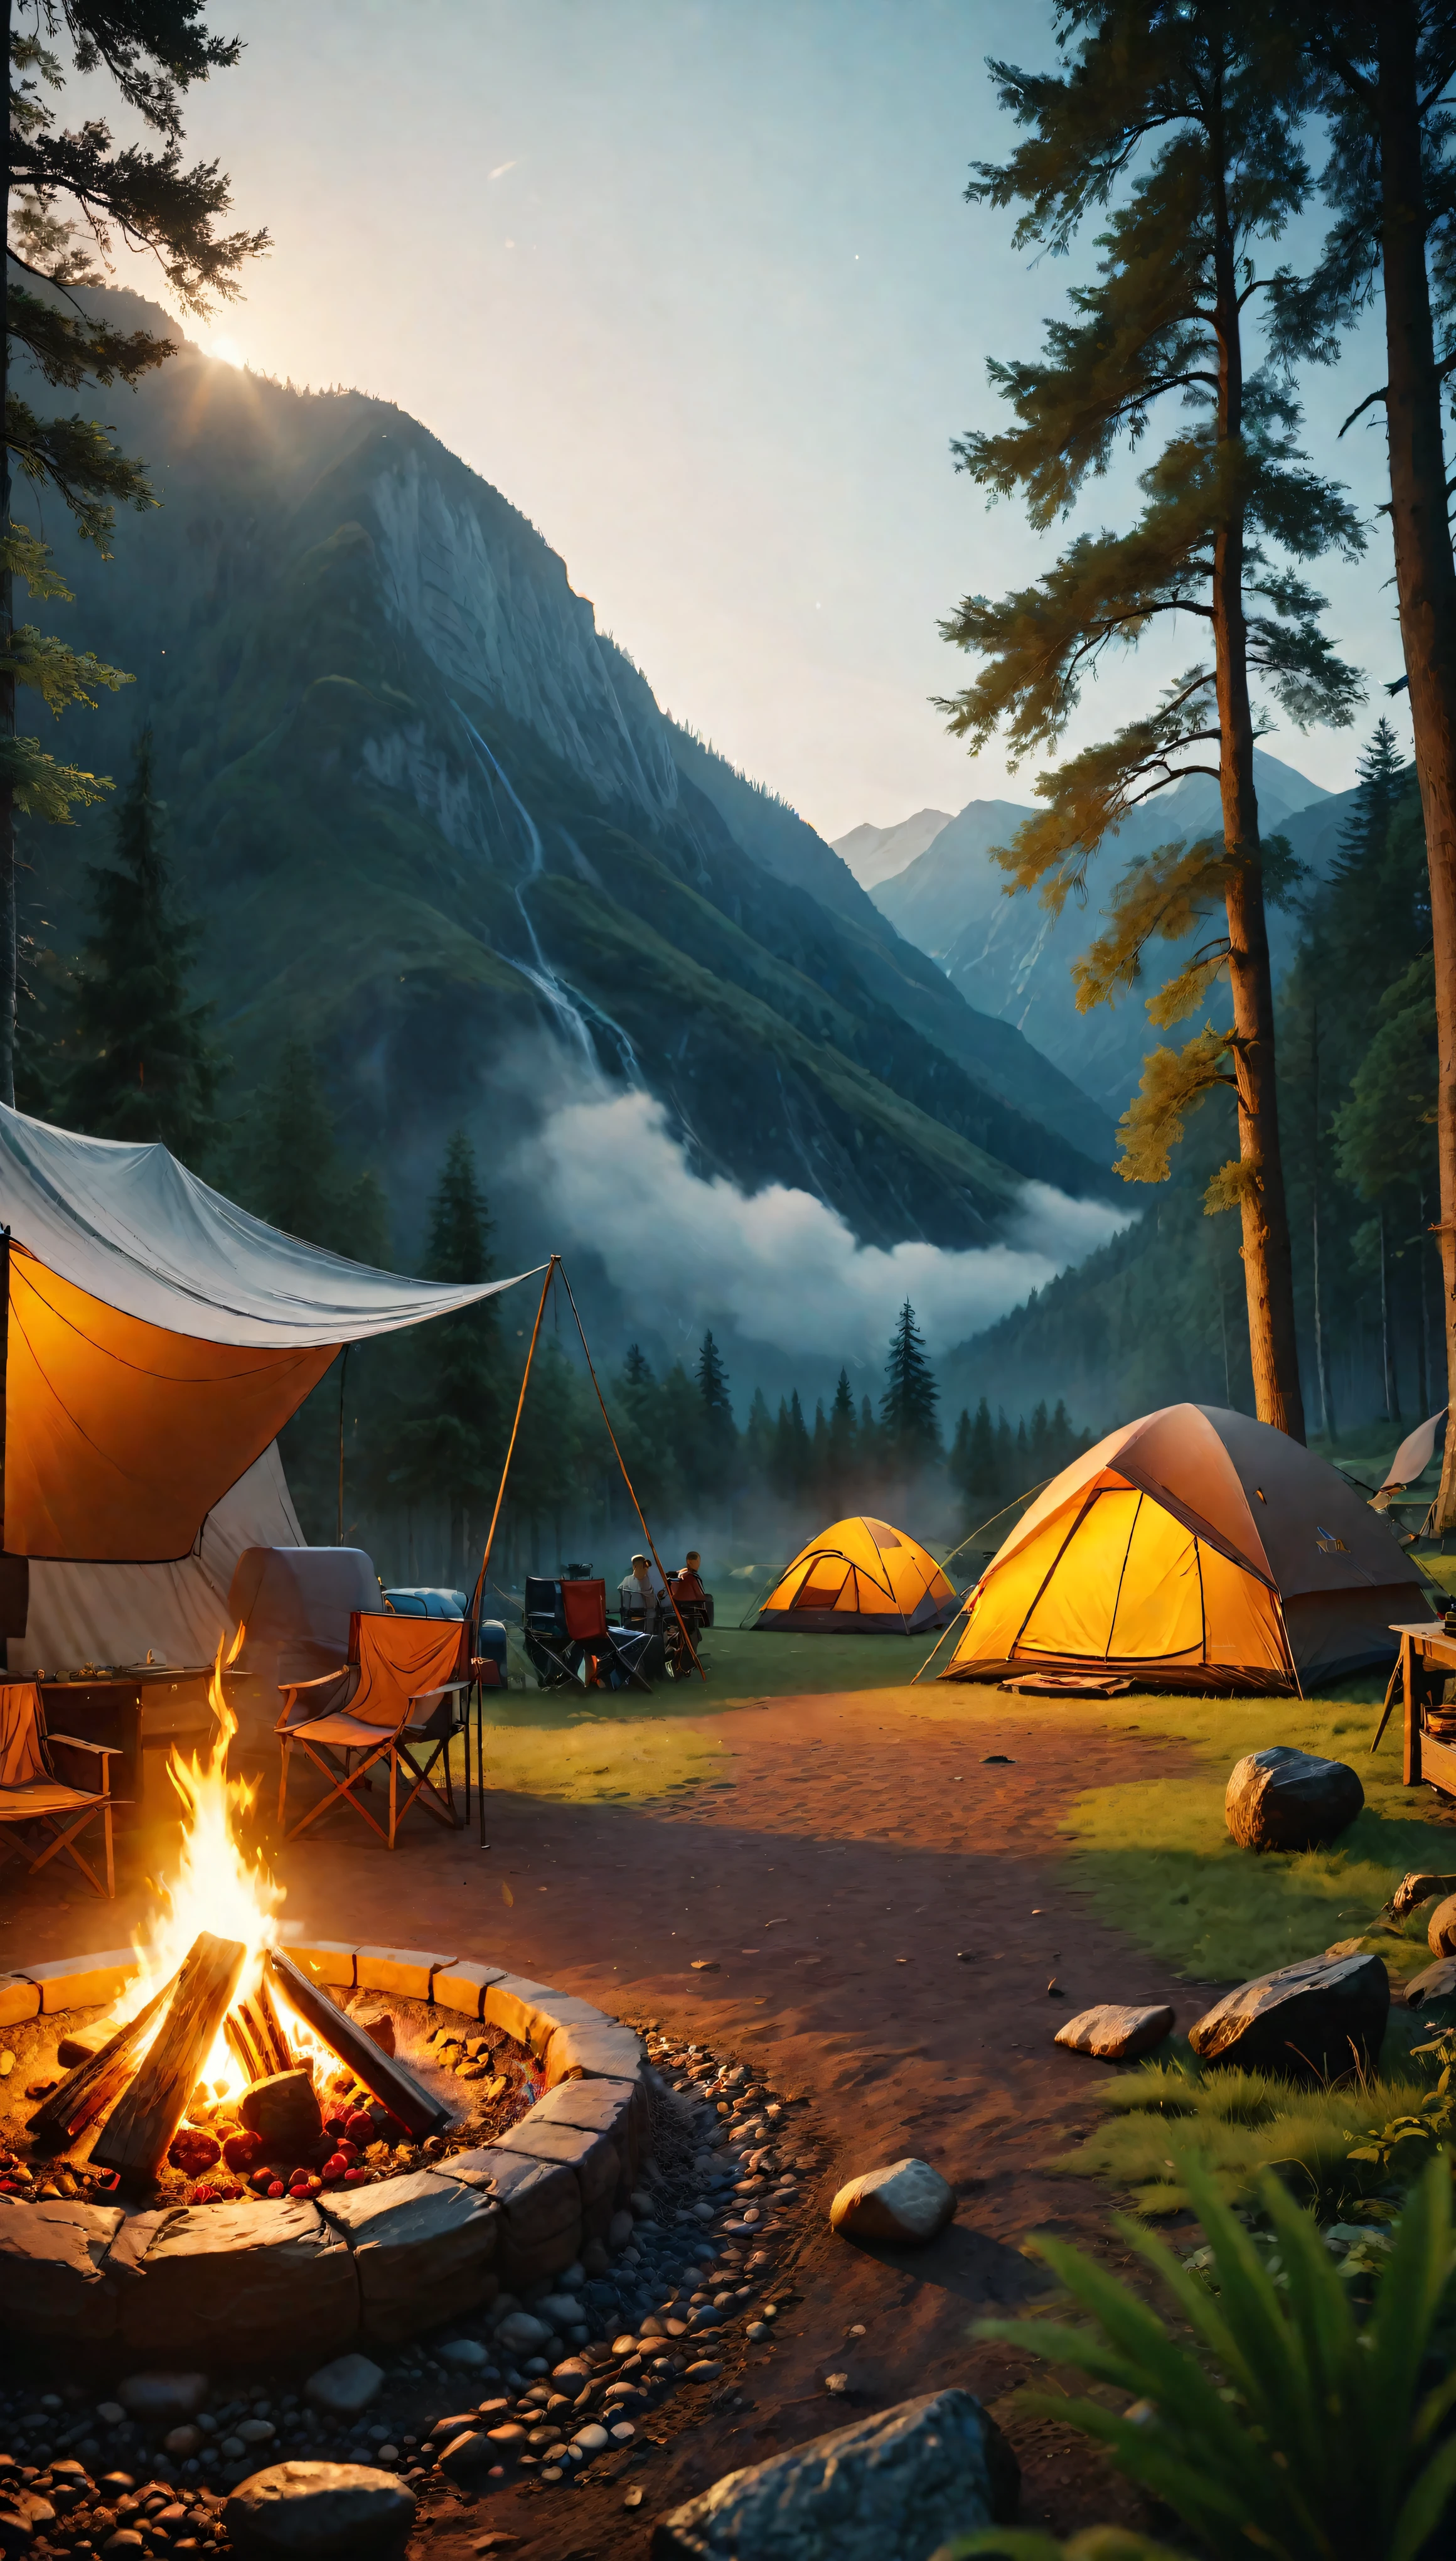 ((Masterpiece in maximum 16K resolution):1.6),((soft_color_photograpy:)1.5), ((Ultra-Detailed):1.4),((Movie-like still images and dynamic angles):1.3),((Wide cinematic lens):1.1). | ((Wide Cinematic shot of a warm campsite in a beautiful outdoors):1.2), ((a warm campsite):1.1), ((beautiful outdoors):1.3), (wide cinematic lens), (tyndall effect), (awesome landscape), (majestic sky), (heartwarming atmosphere), (shimmer), (visual experience) ,(Realism), (Realistic),award-winning graphics, dark shot, film grain, extremely detailed, Digital Art, rtx, Unreal Engine, scene concept anti glare effect, All captured with sharp focus. | Rendered in ultra-high definition with UHD and retina quality, this masterpiece ensures anatomical correctness and textured skin with super detail. With a focus on high quality and accuracy, this award-winning portrayal captures every nuance in stunning 16k resolution, immersing viewers in its lifelike depiction. | ((perfect_composition, perfect_design, perfect_layout, perfect_detail, ultra_detailed)), ((enhance_all, fix_everything)), More Detail, Enhance.